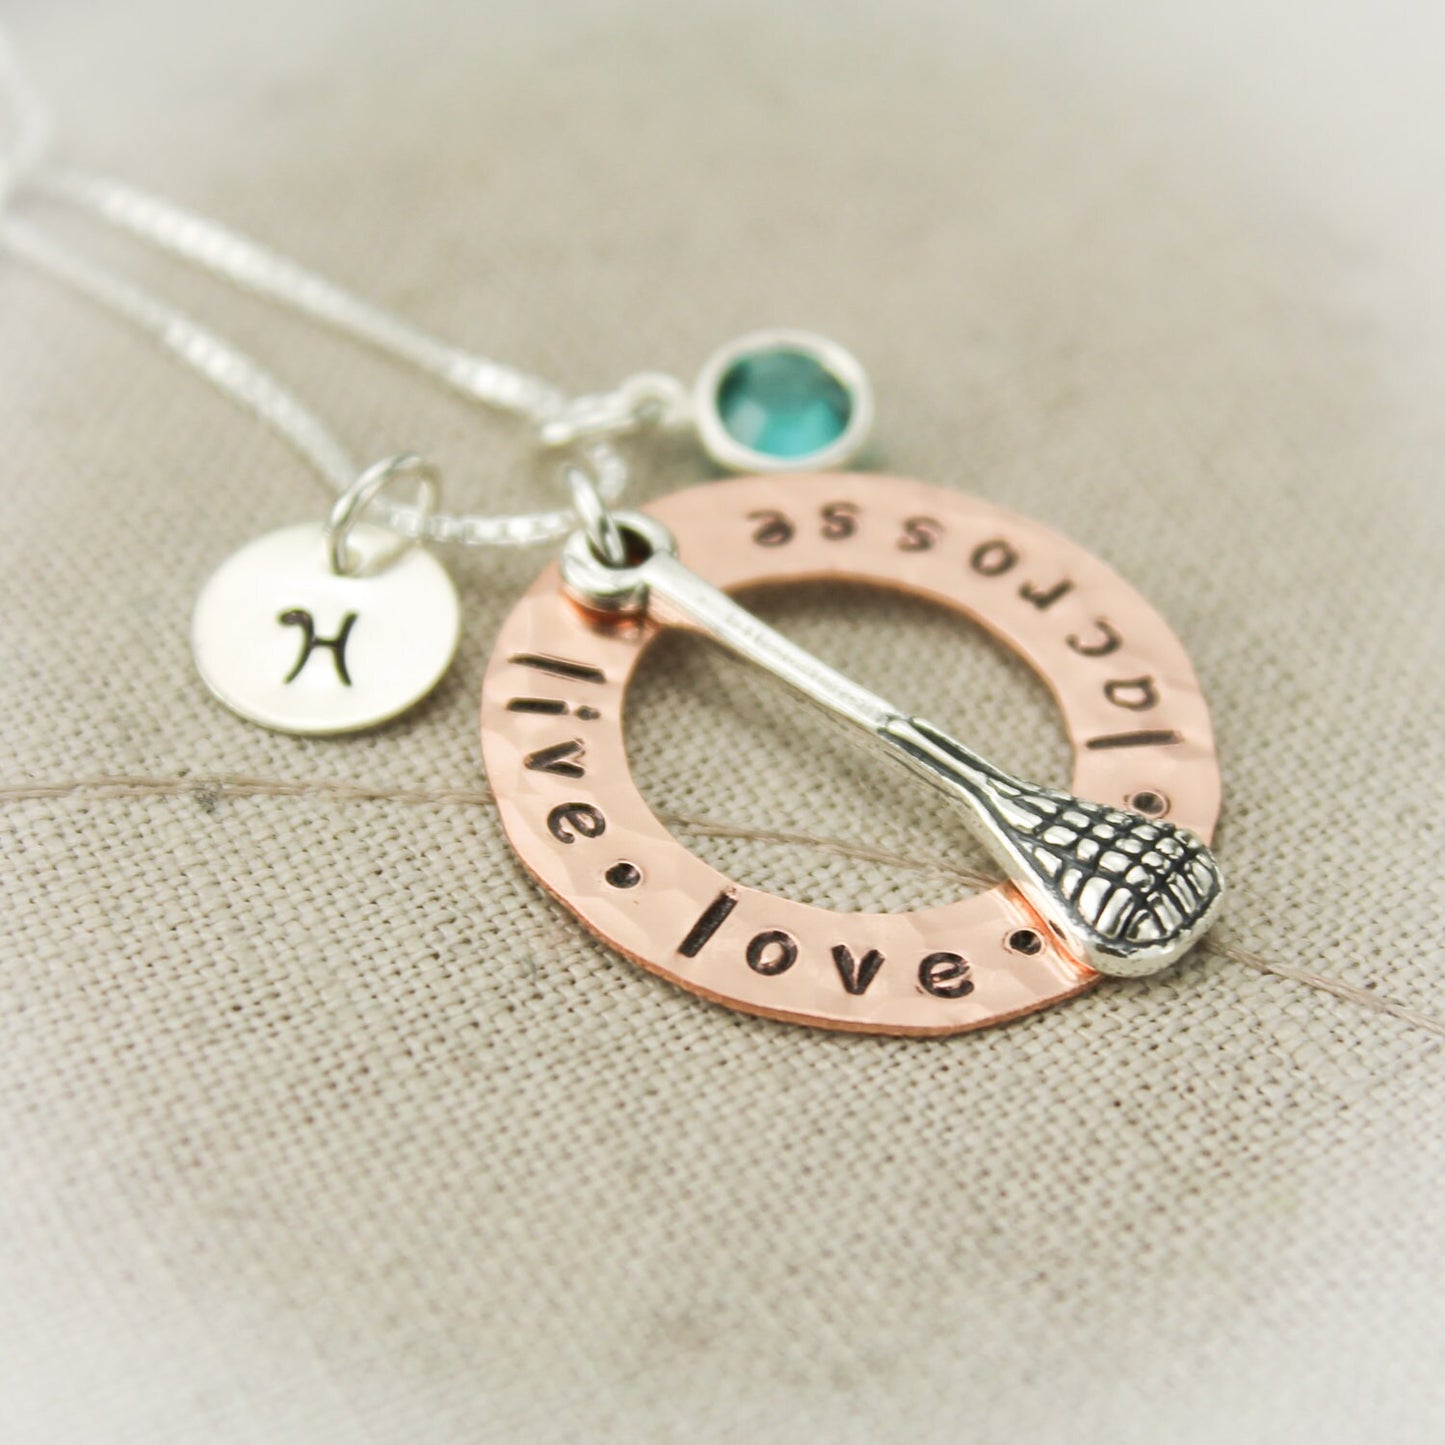 Lacrosse Charm Copper Washer and Sterling Silver Personalized Hand Stamped Necklace